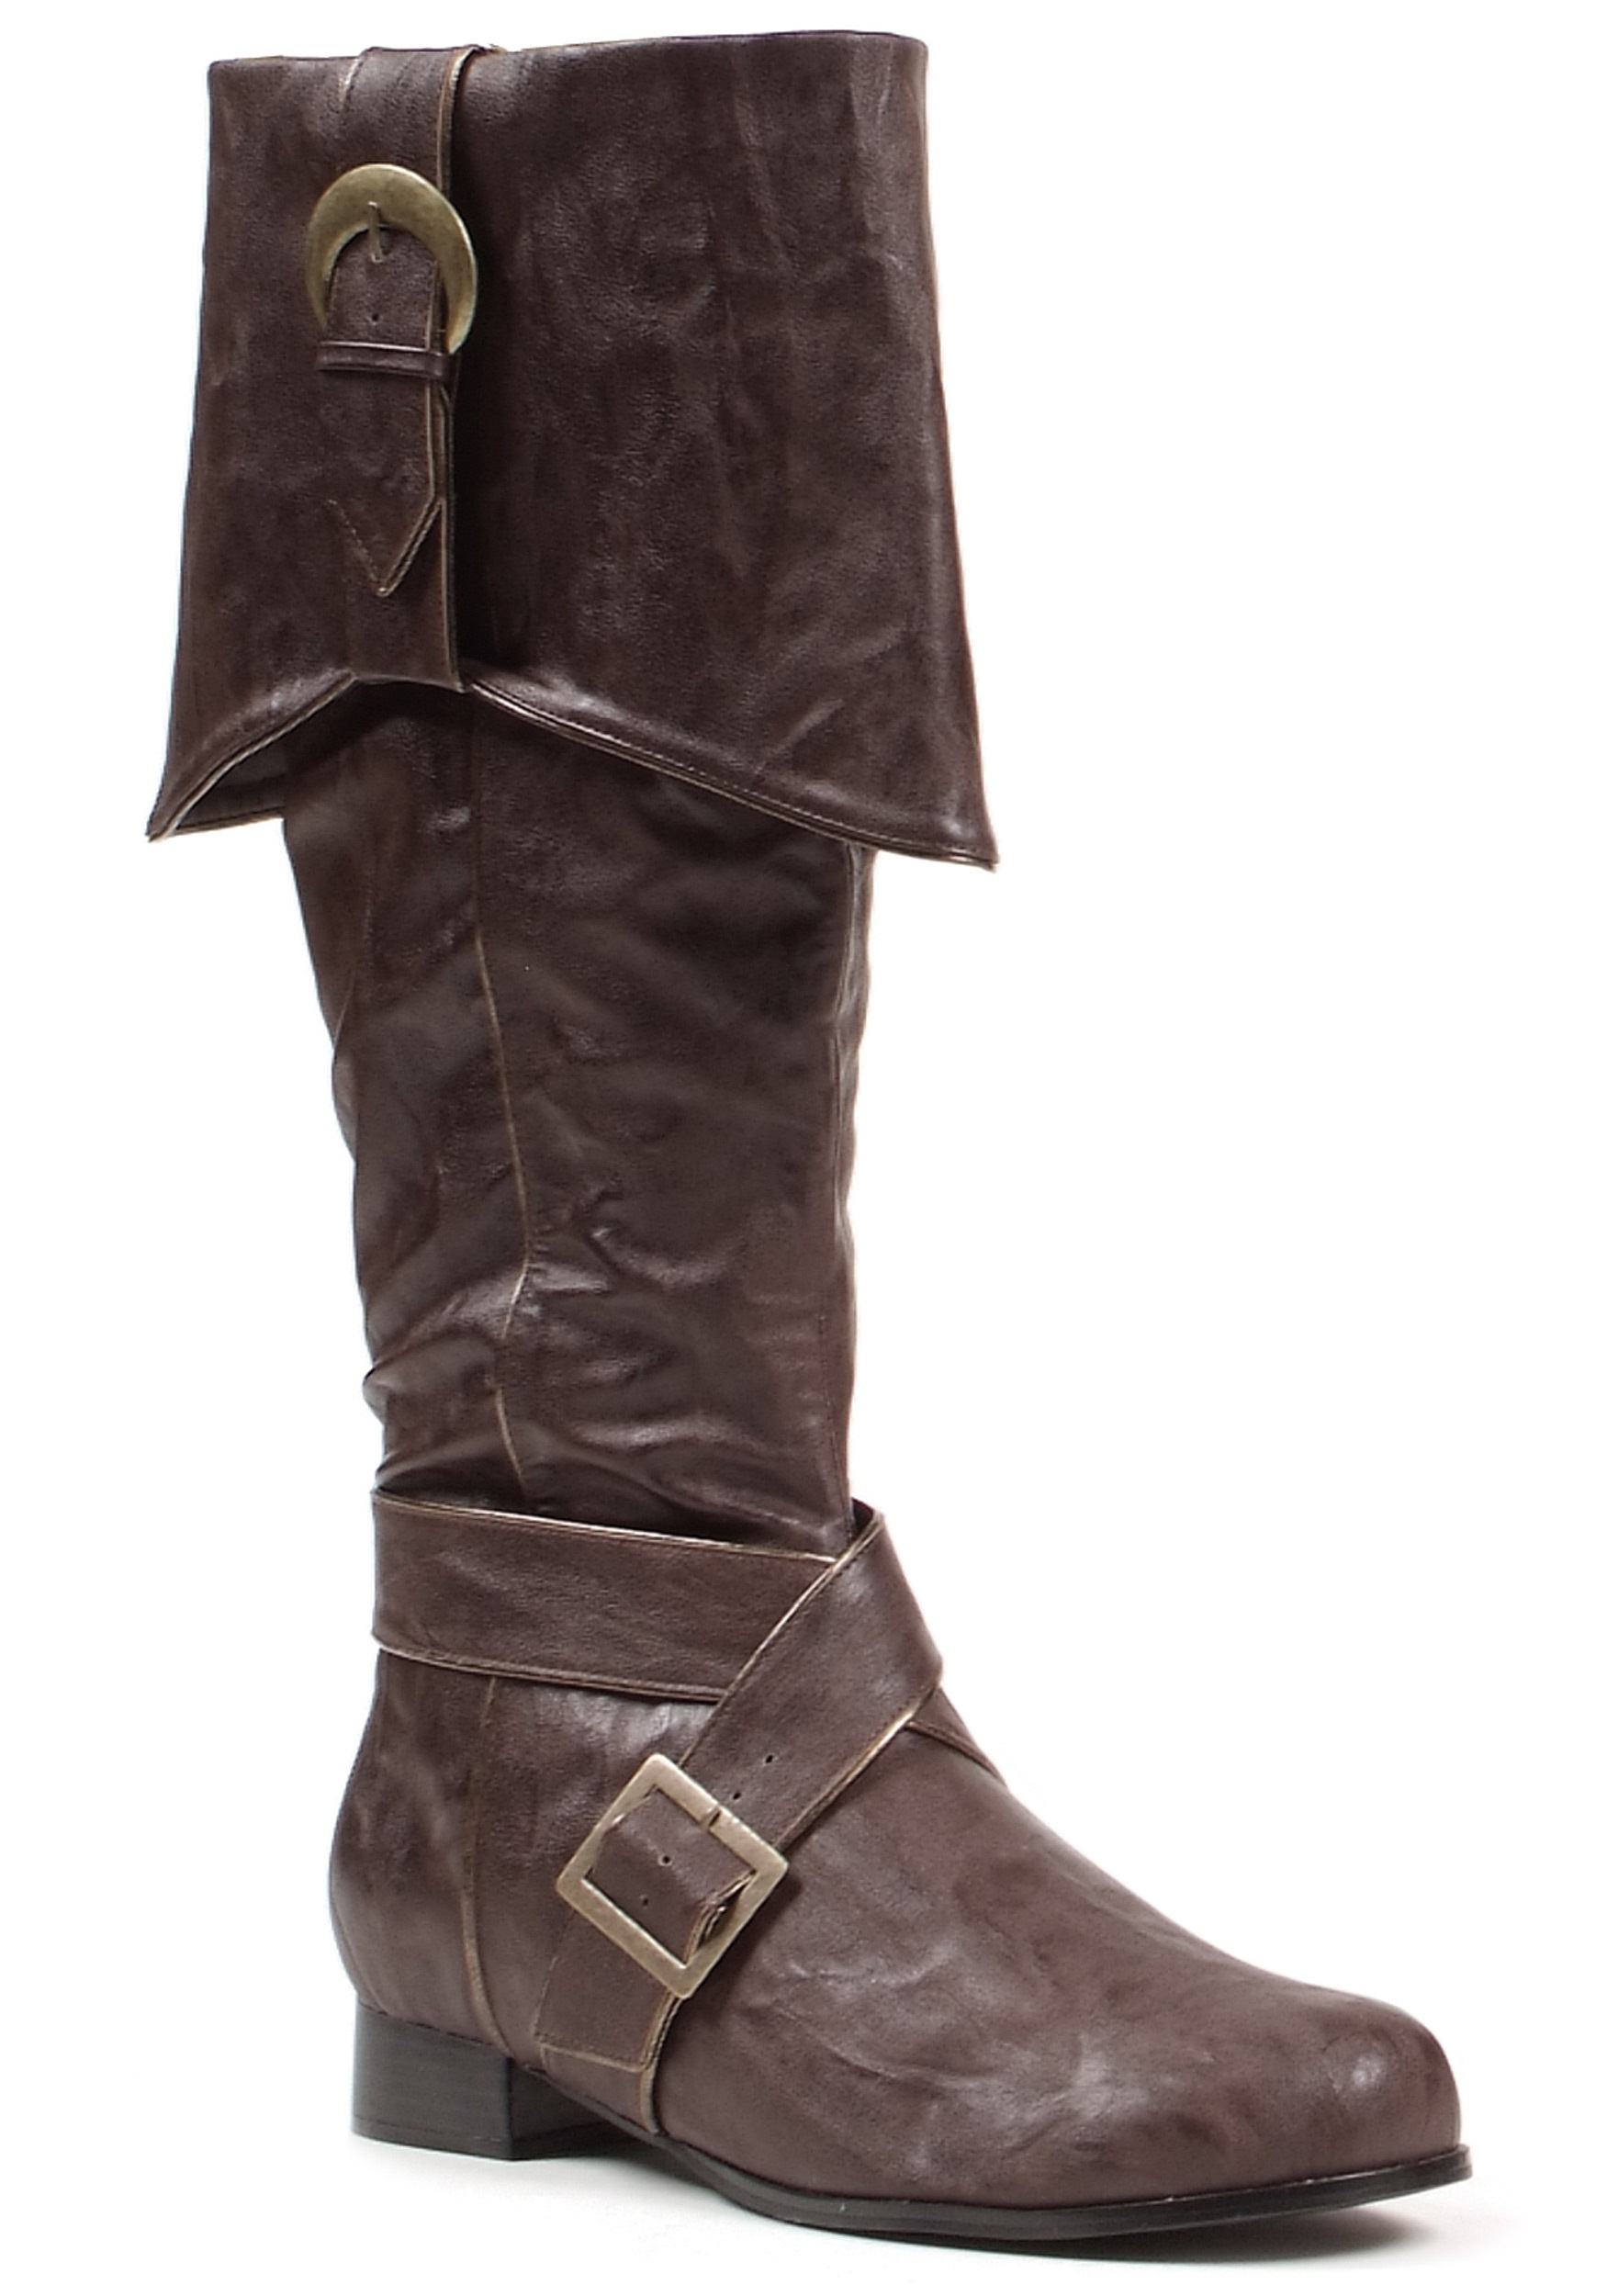 Men’s Brown Buckle Pirate Boots